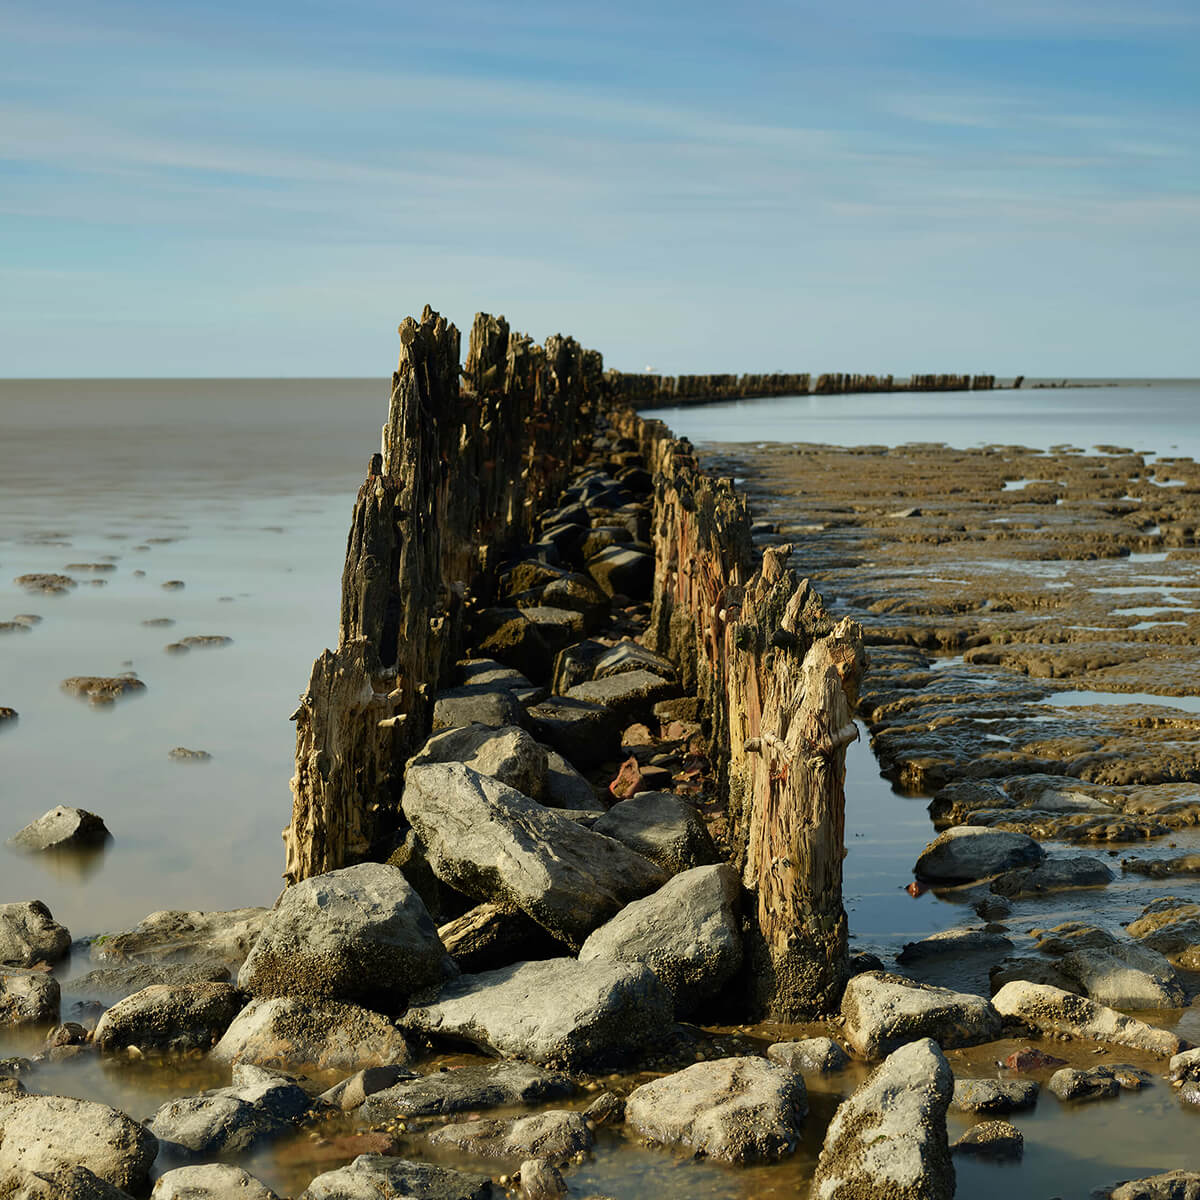 Breakwater of wood and stone